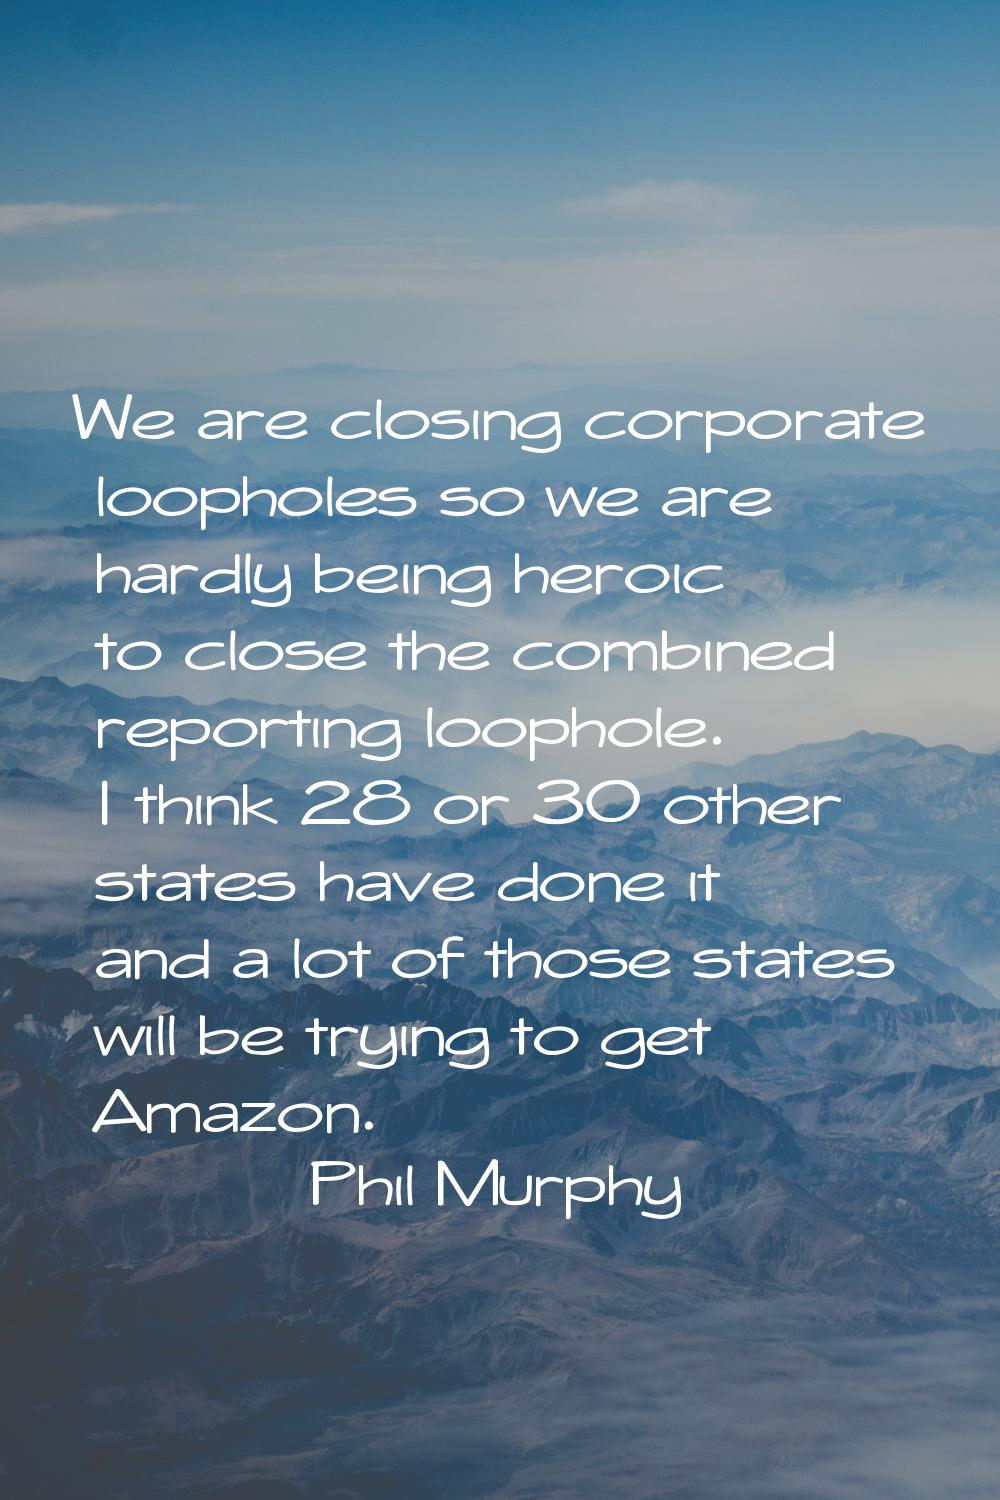 We are closing corporate loopholes so we are hardly being heroic to close the combined reporting lo